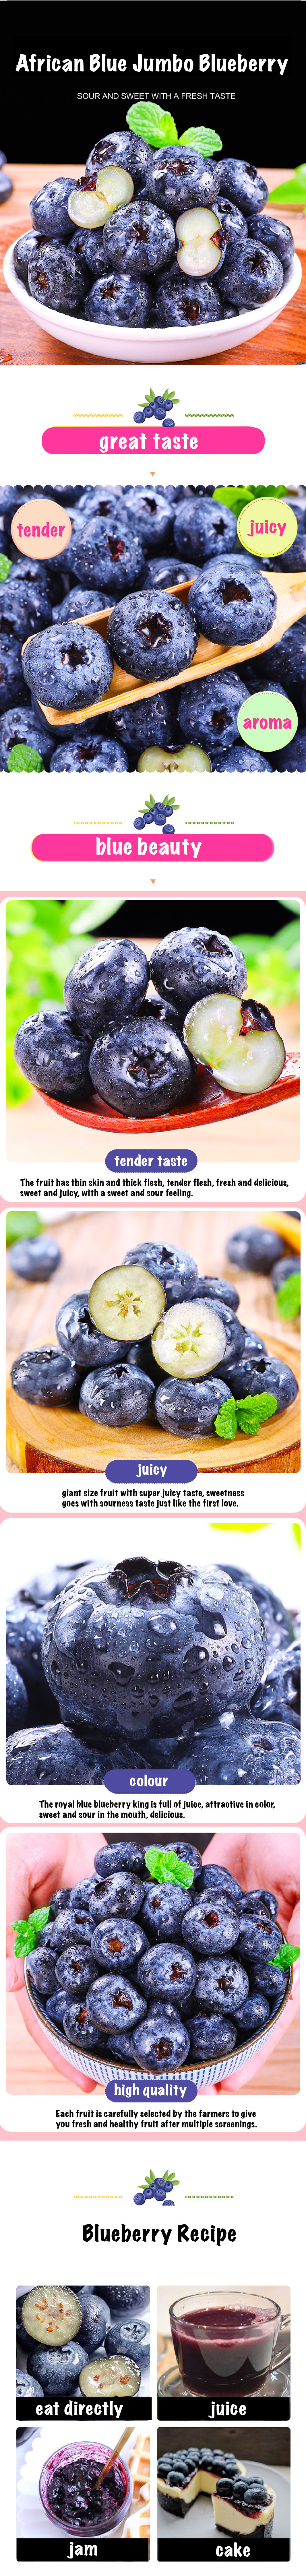 Delicious and Nutritious Jumbo Blueberries in Singapore